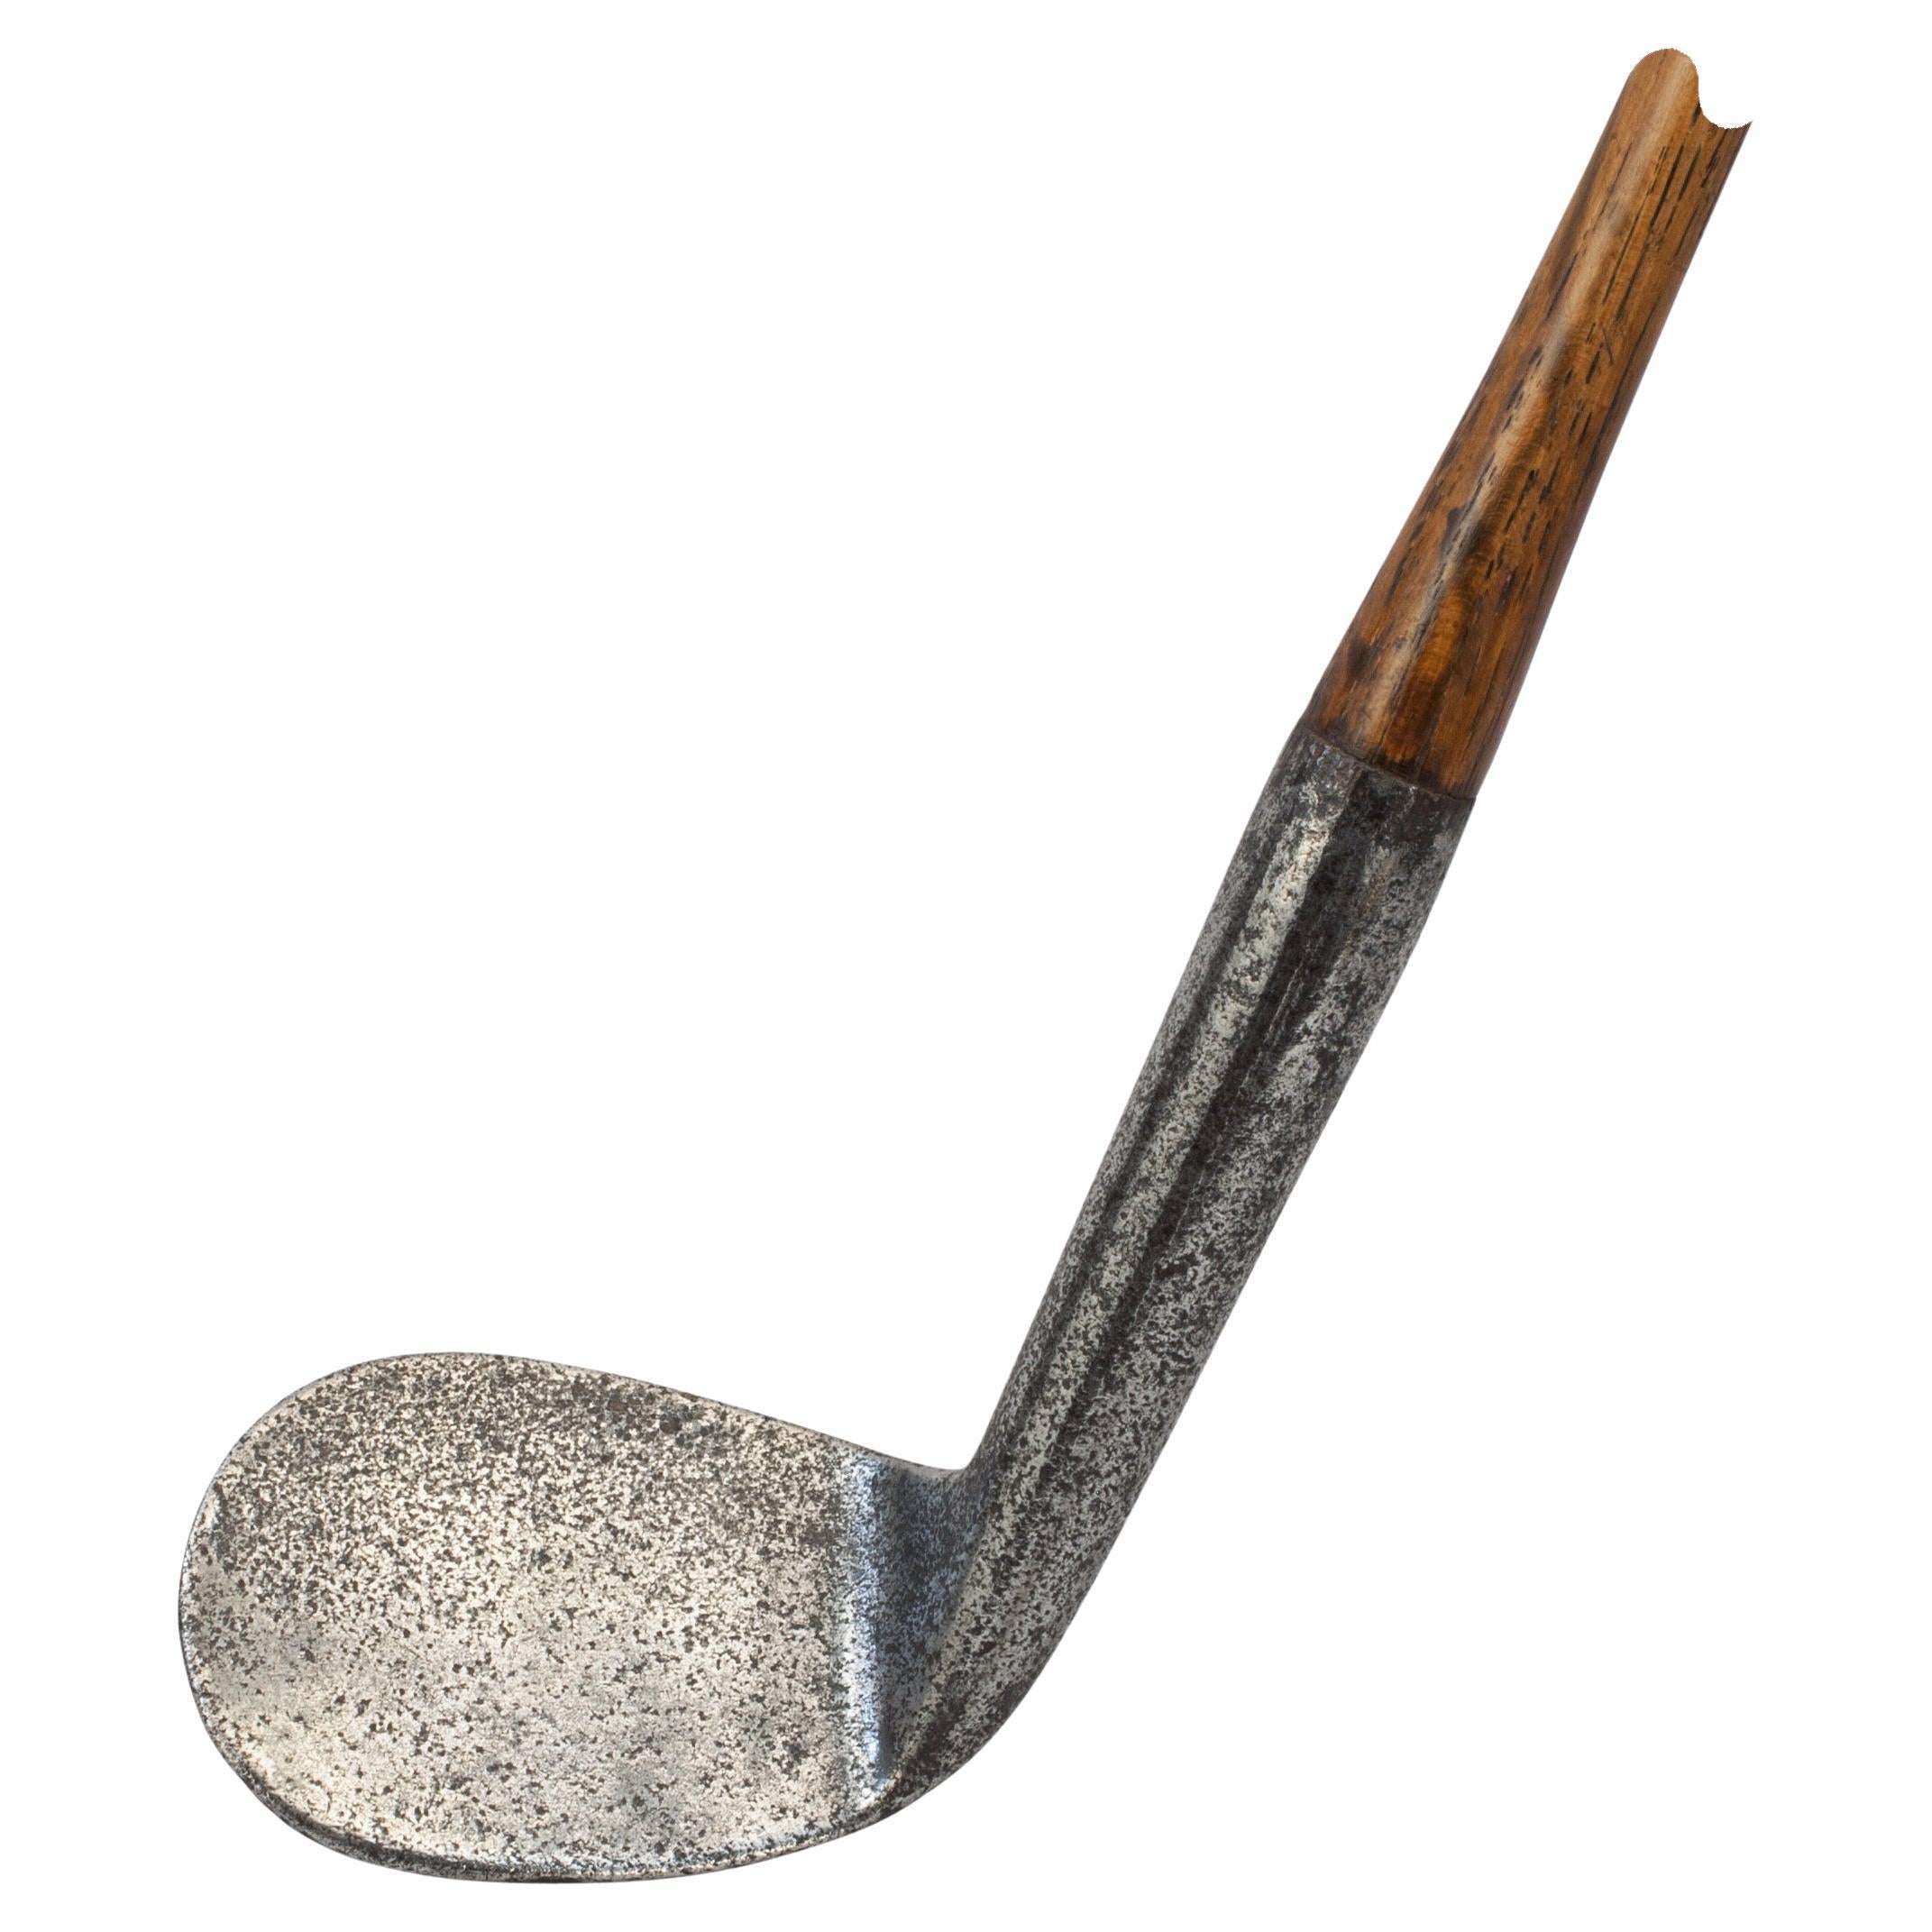 Antique Rut Niblick, Hickory Shafted Golf Club For Sale